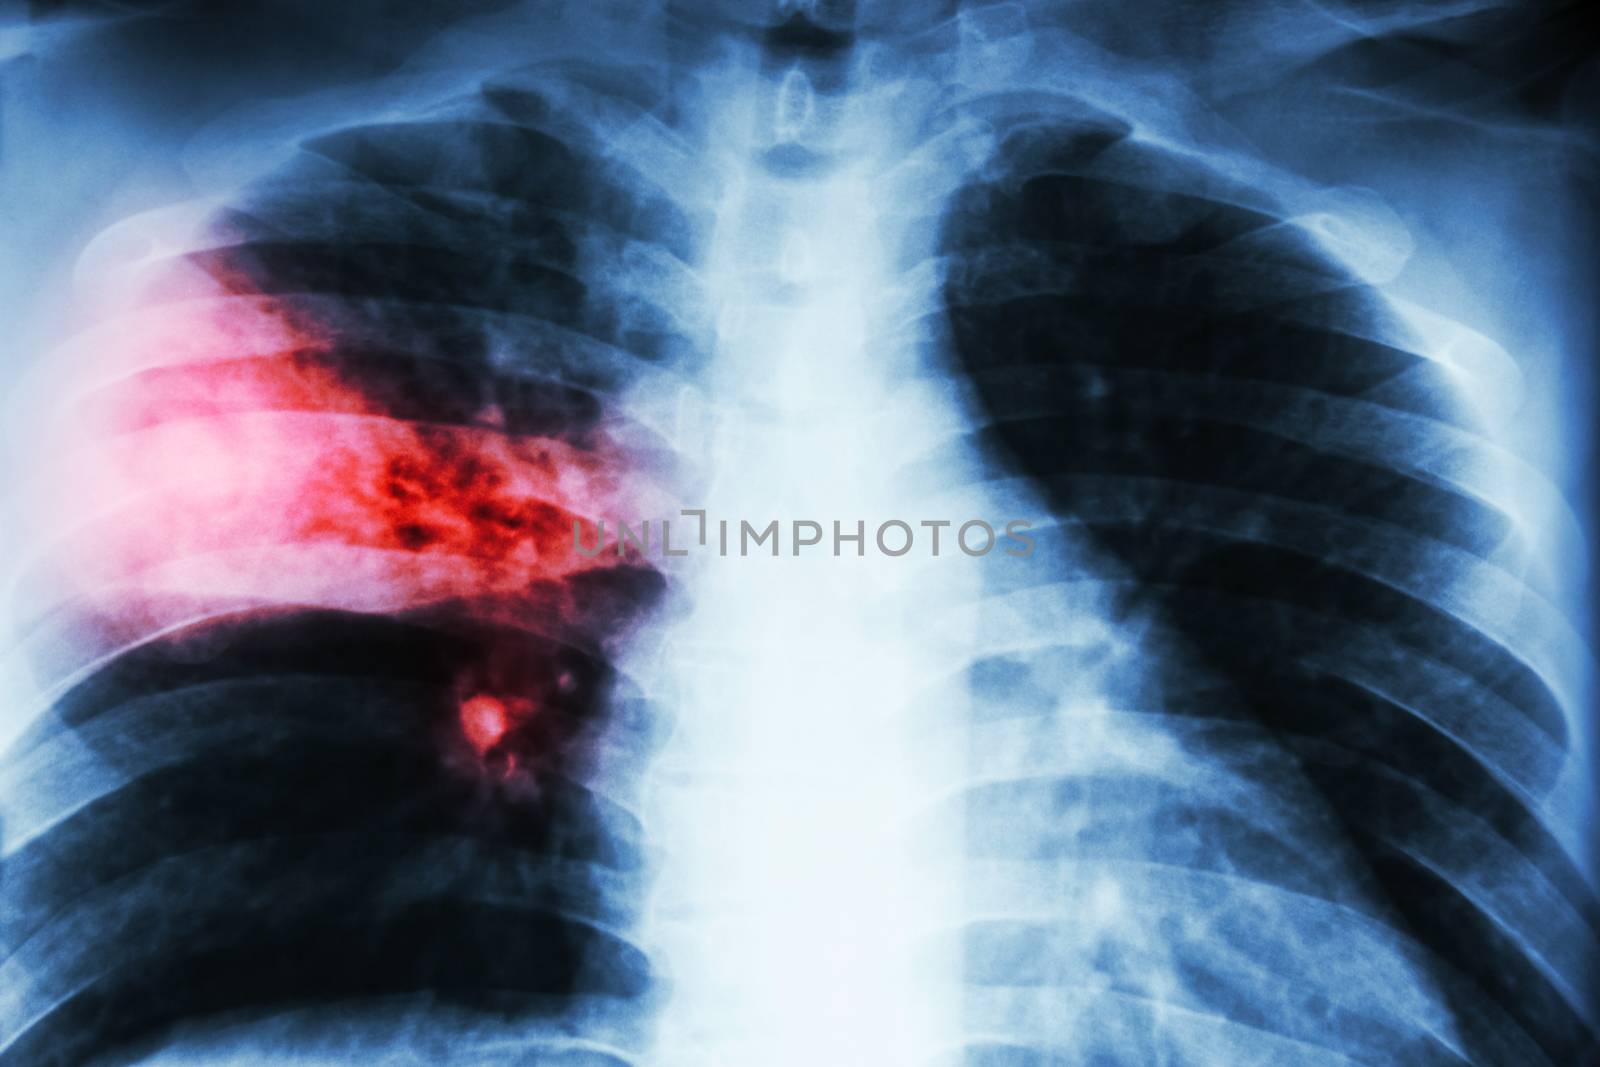 Lobar pneumonia . film chest x-ray show alveolar infiltration at right middle lobe due to tuberculosis infection . by stockdevil